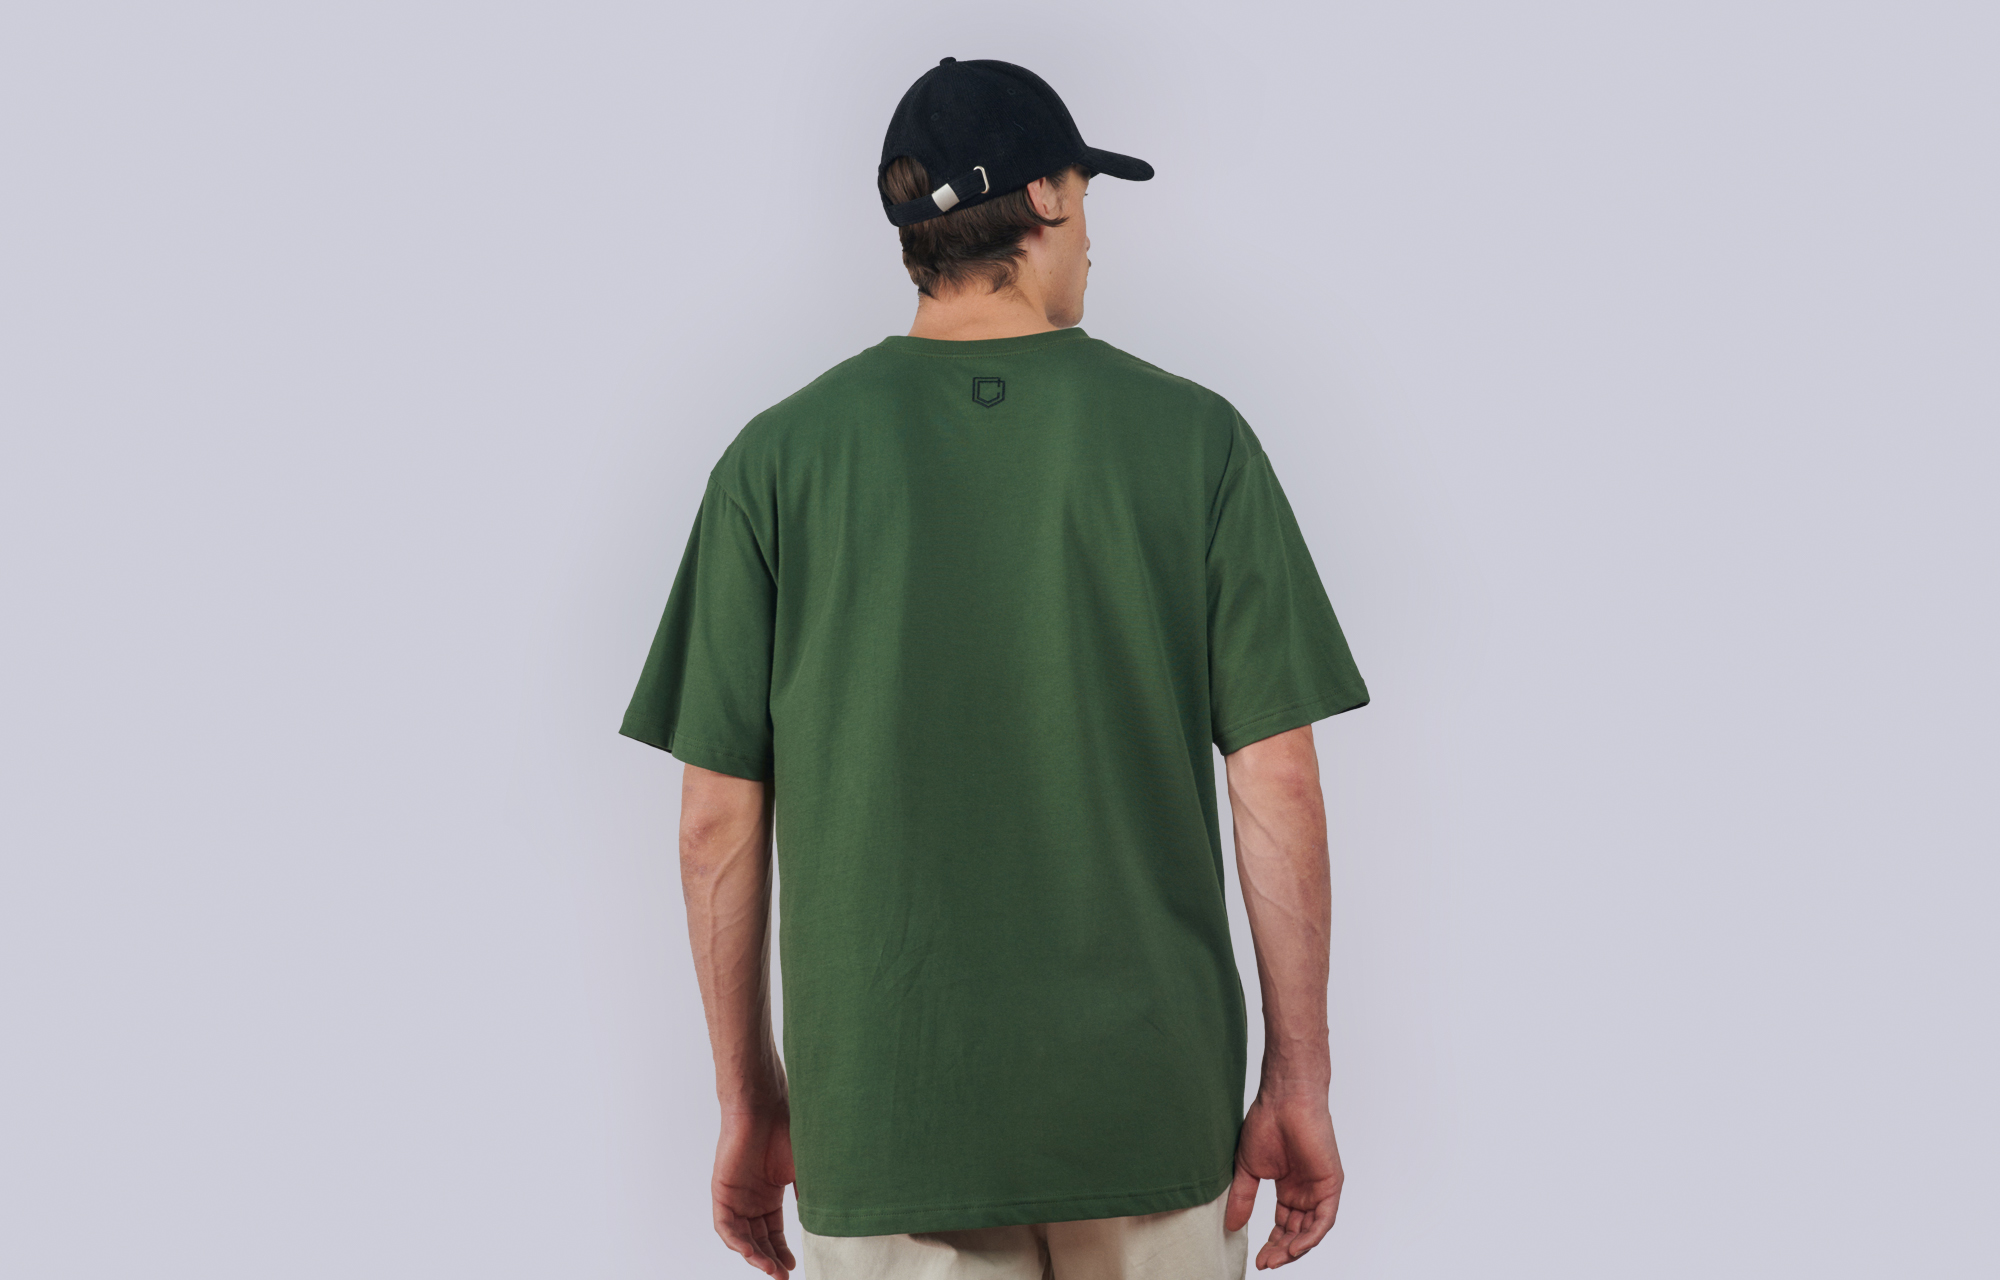 COMMENCAL CORPORATE T-SHIRT DARK GREEN image number 0